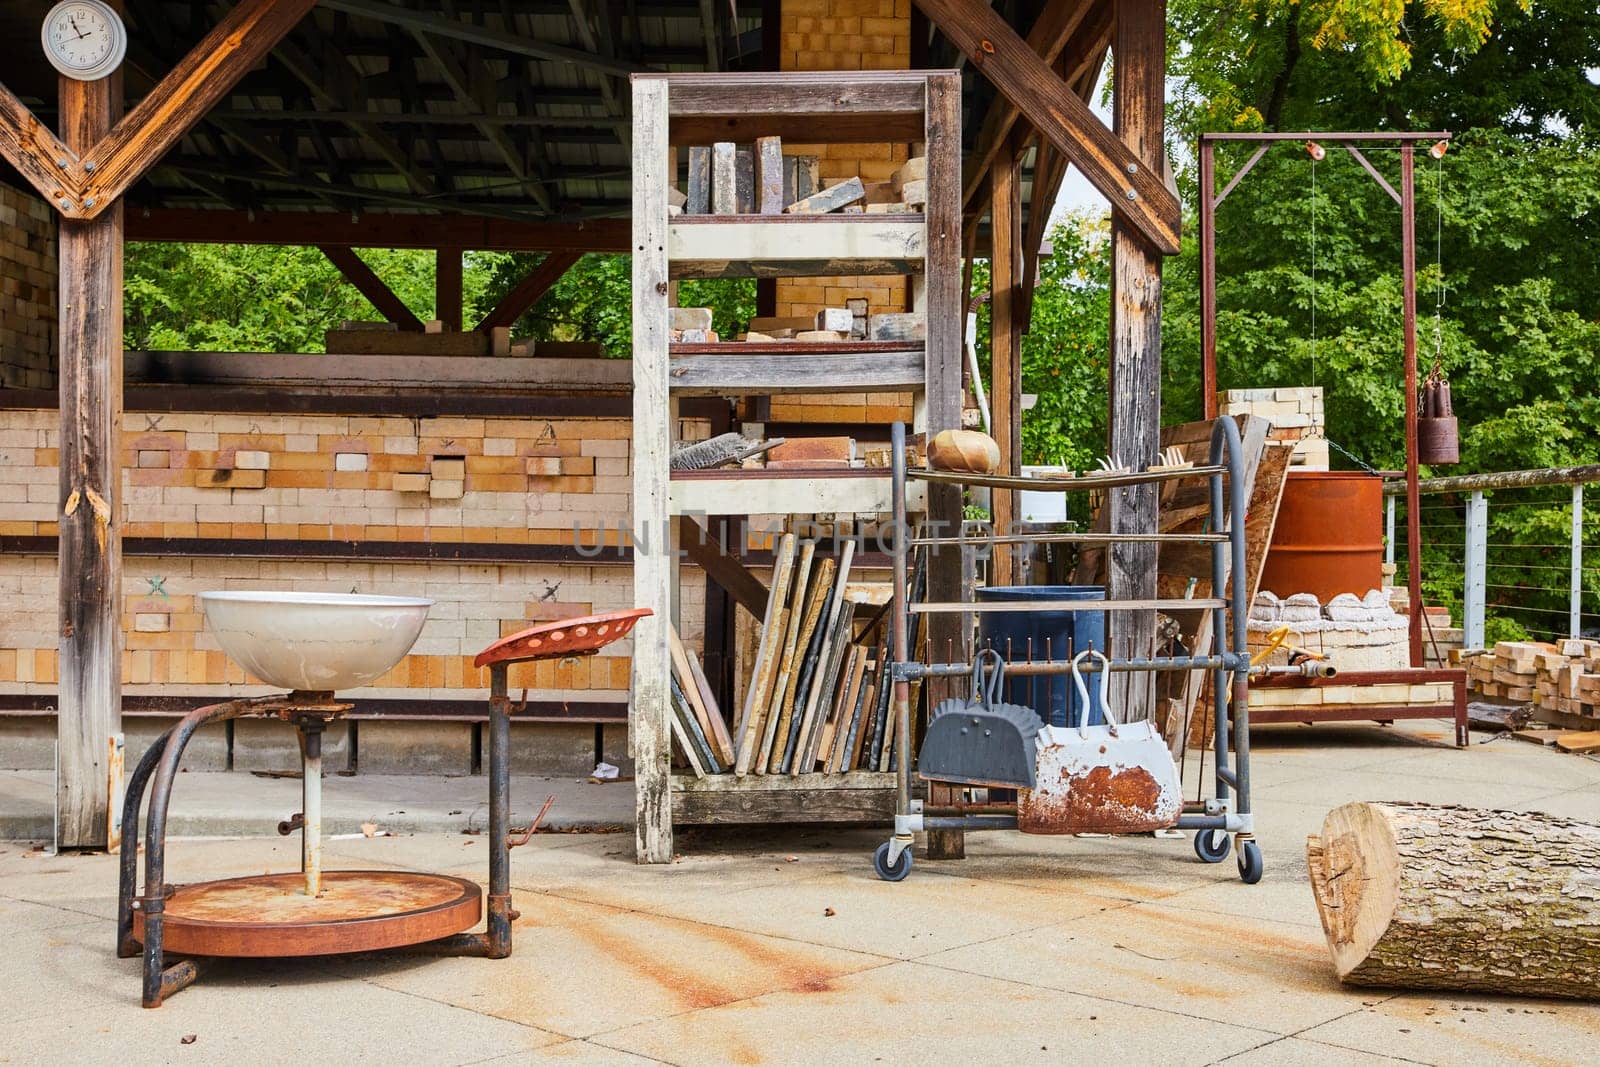 Rustic Artisan Workshop in Daylight - Traditional Pottery Tools, Ceramic Kiln, and Old Basin in an Industrial Outdoor Setting, Art Center, Indianapolis, Indiana 2023